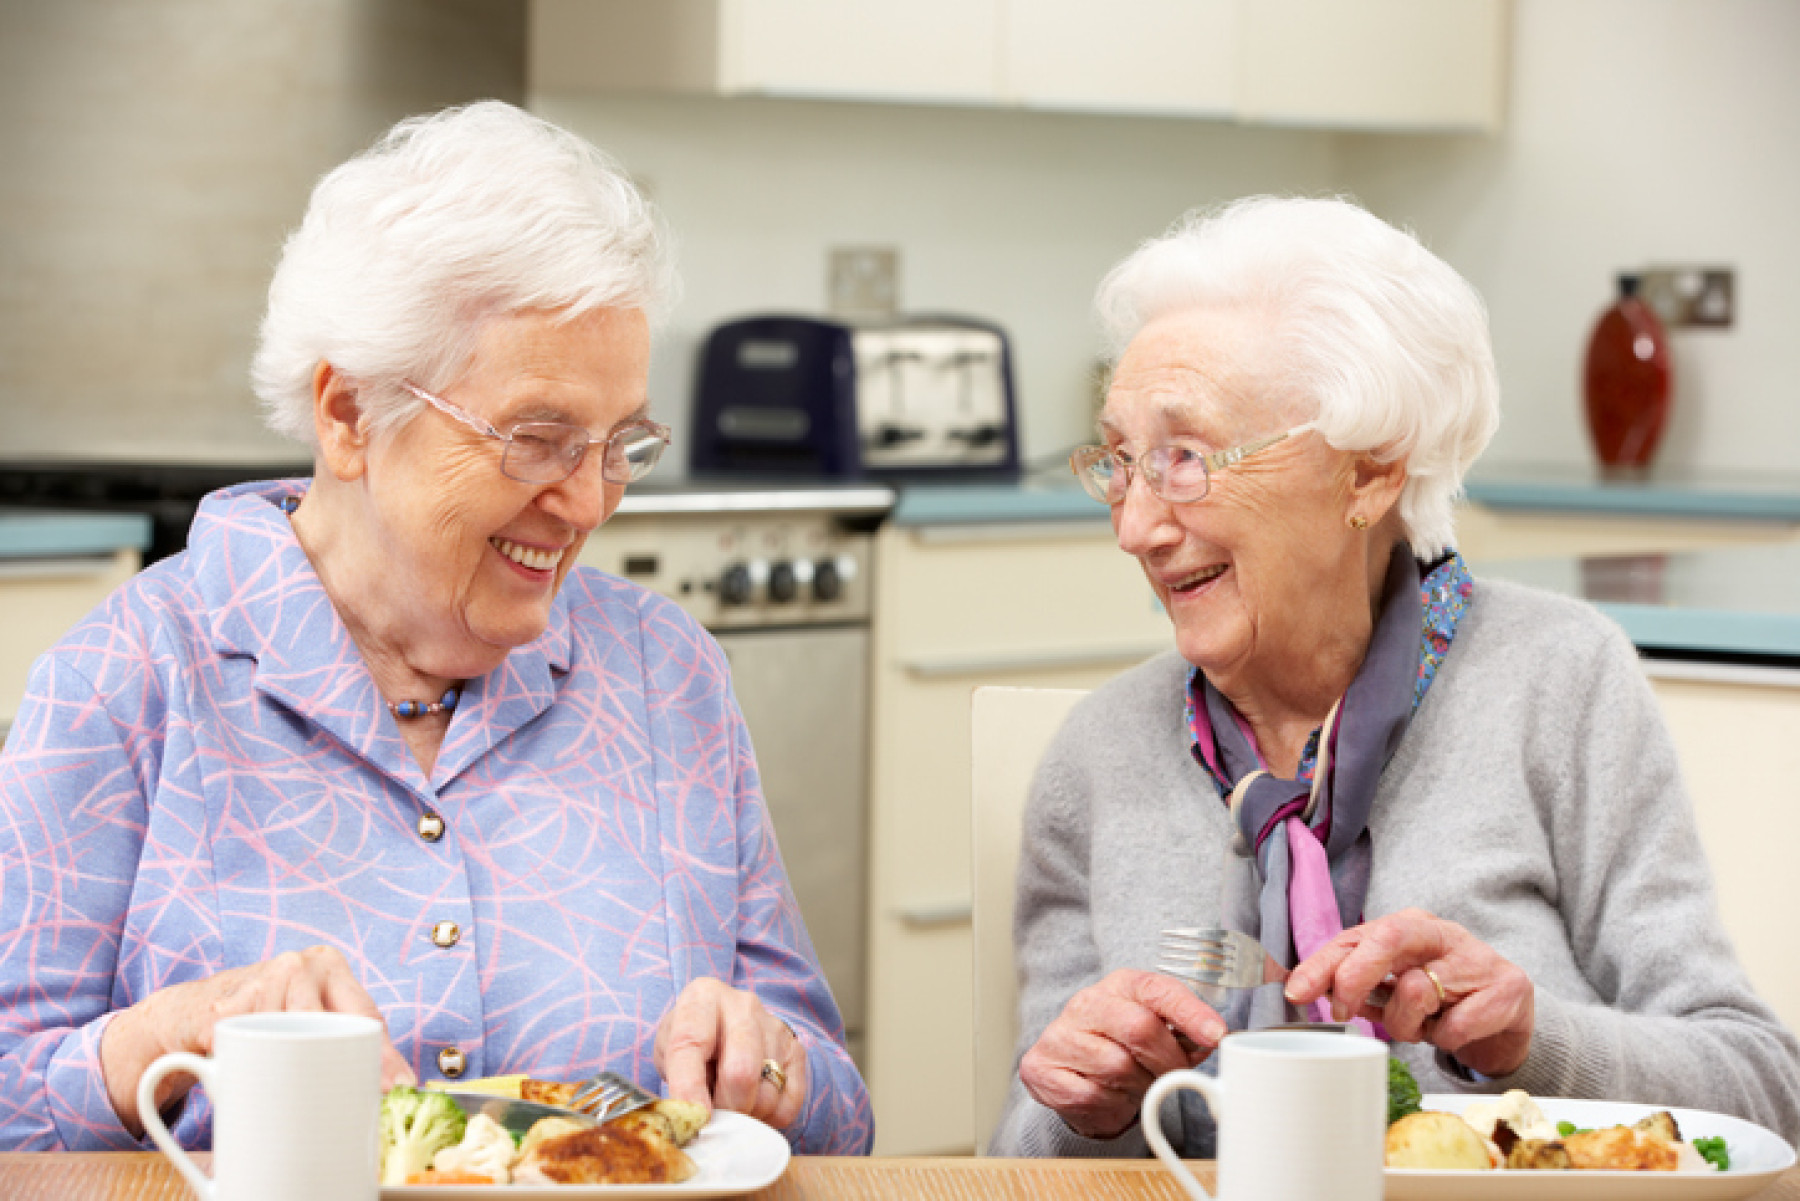 Two elderly women laughing and dining together, representing companionship and the joy of shared independent living under NDIS.